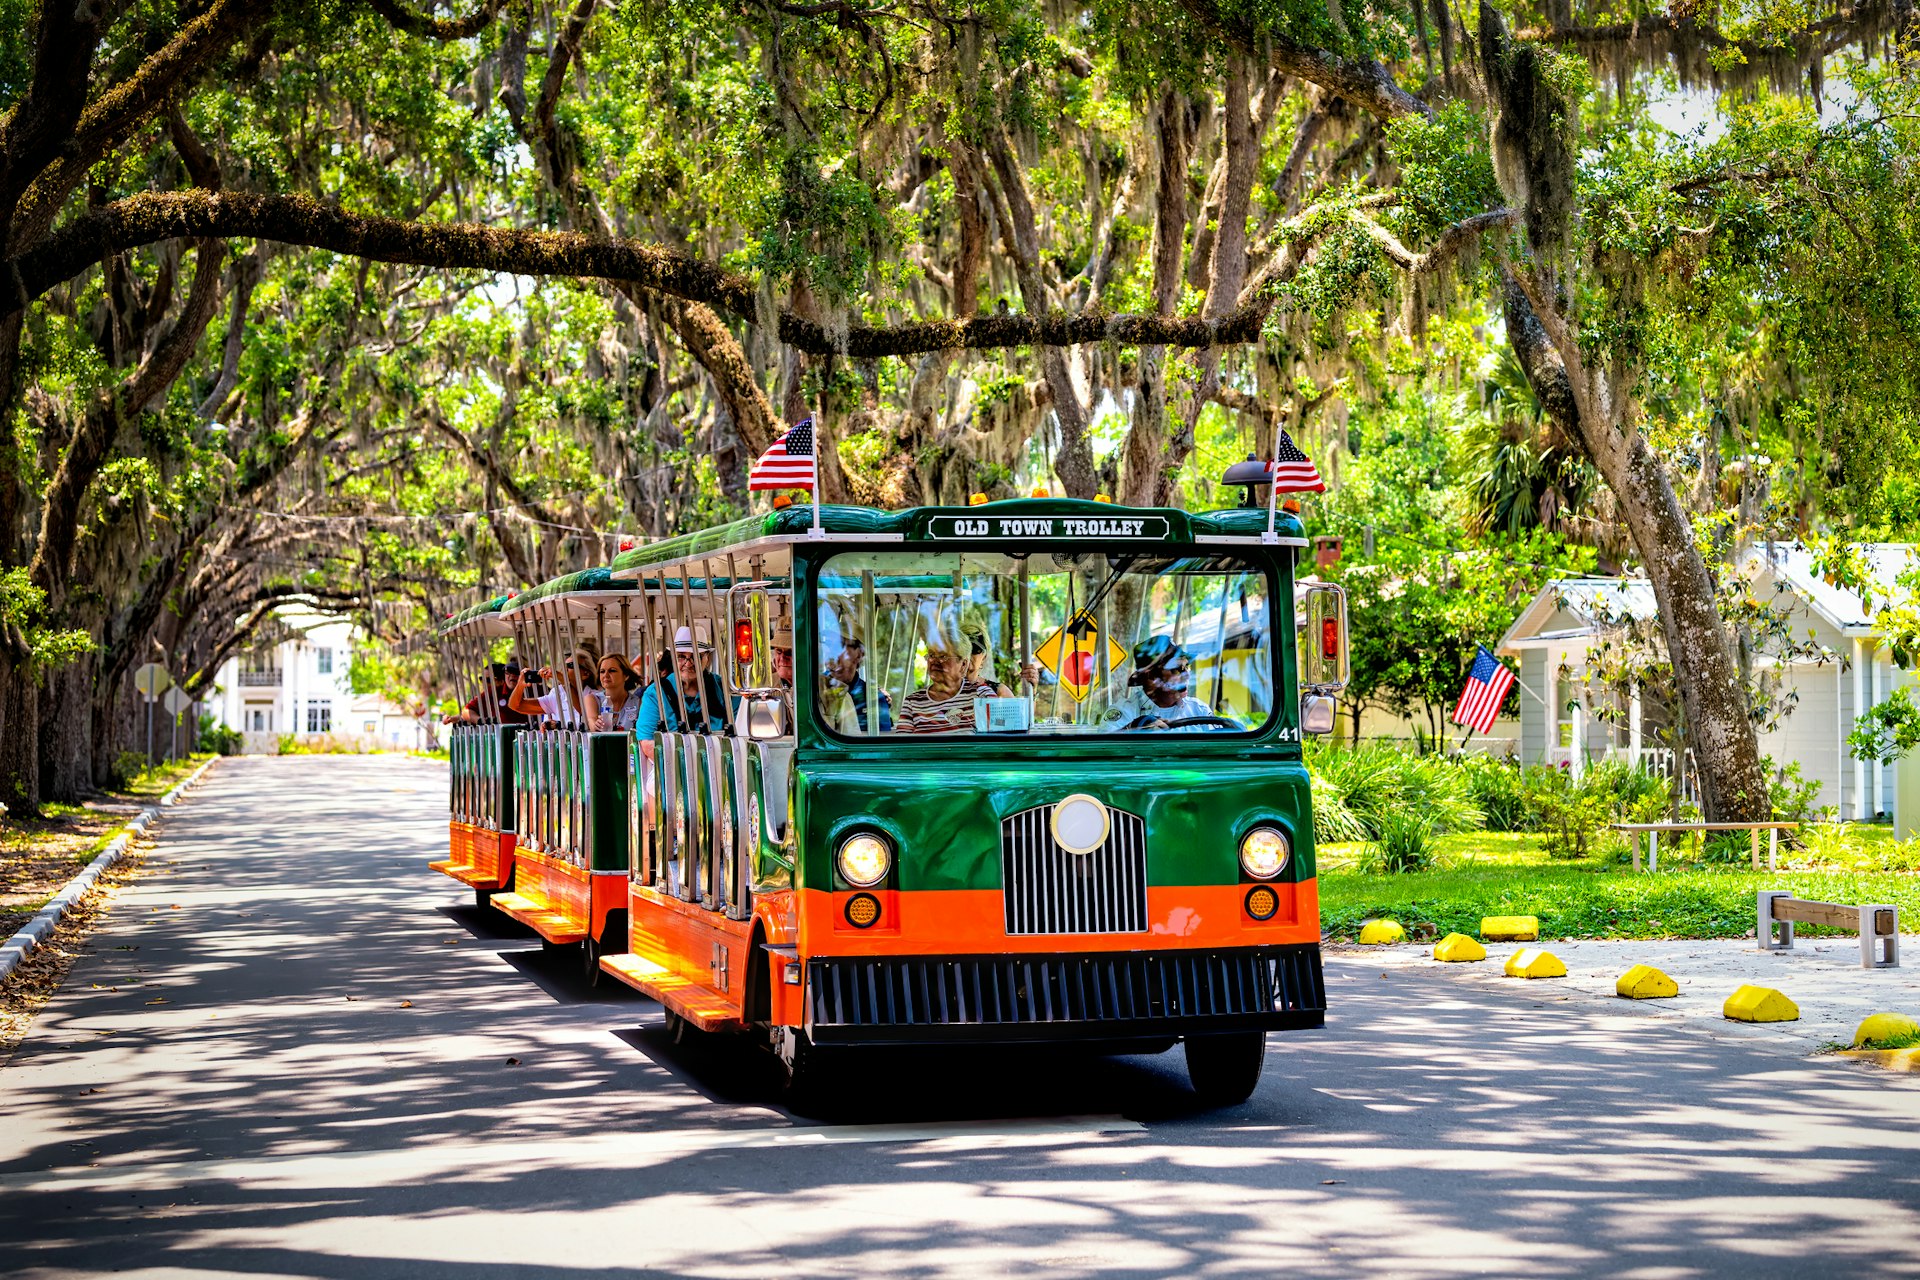 People riding on old town trolley guided tour on a road with live oak trees and a canopy of hanging Spanish moss draped over it